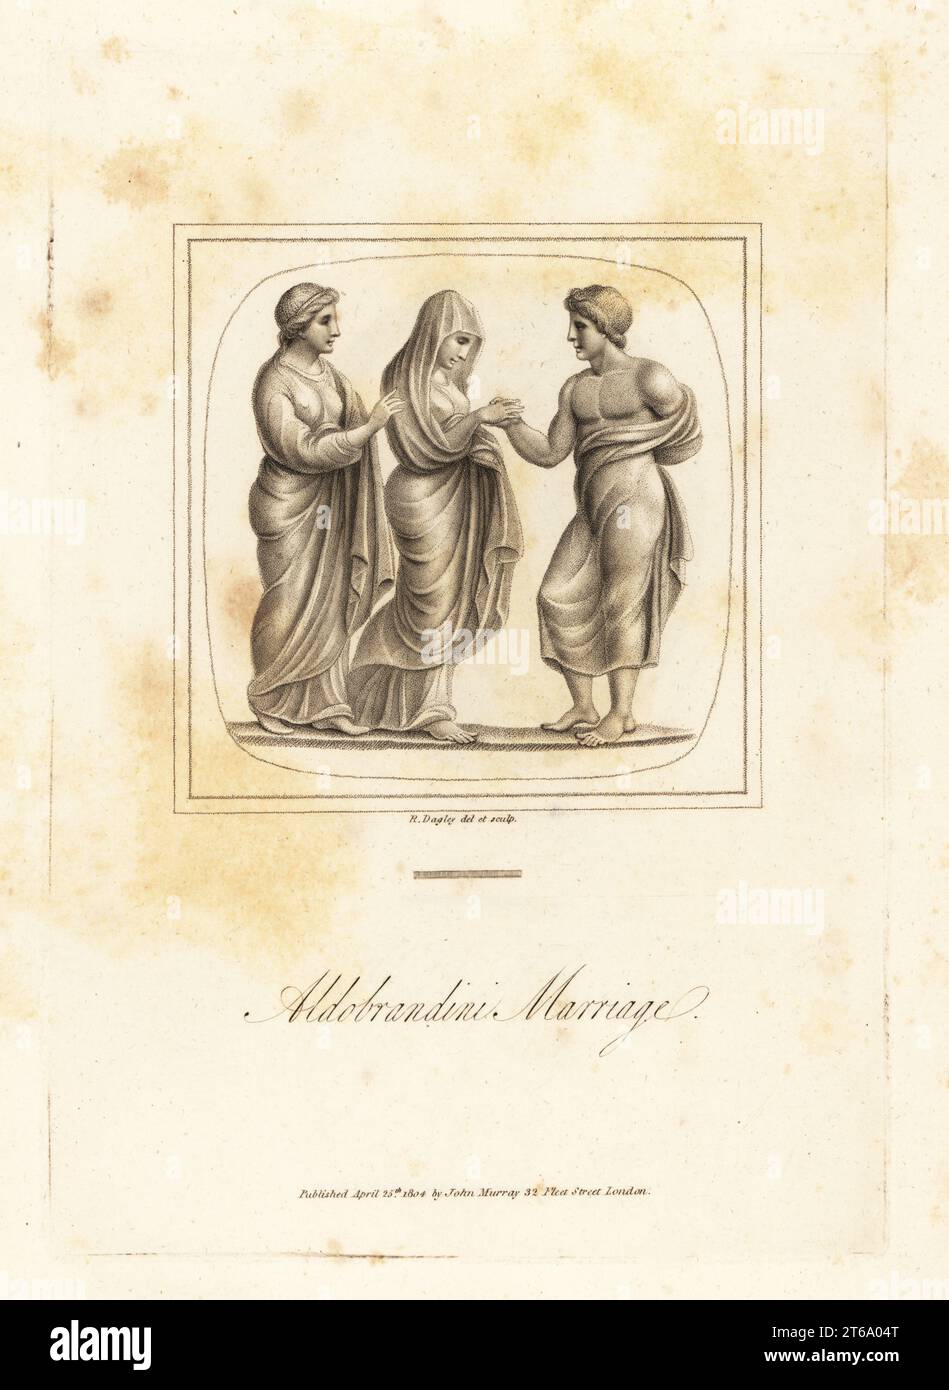 Roman wedding ceremony with bride in veil and groom. The probuba or maid of honour supports the bride. Aldobrandini Marriage or Nozze Aldobrandina. Roman nuptials. In the Lord Algernon Percy collection. Copperplate engraving drawn and engraved by Richard Dagley from Gems, Selected from the Antique, with Illustrations, John Murray, London, 1804. Stock Photo